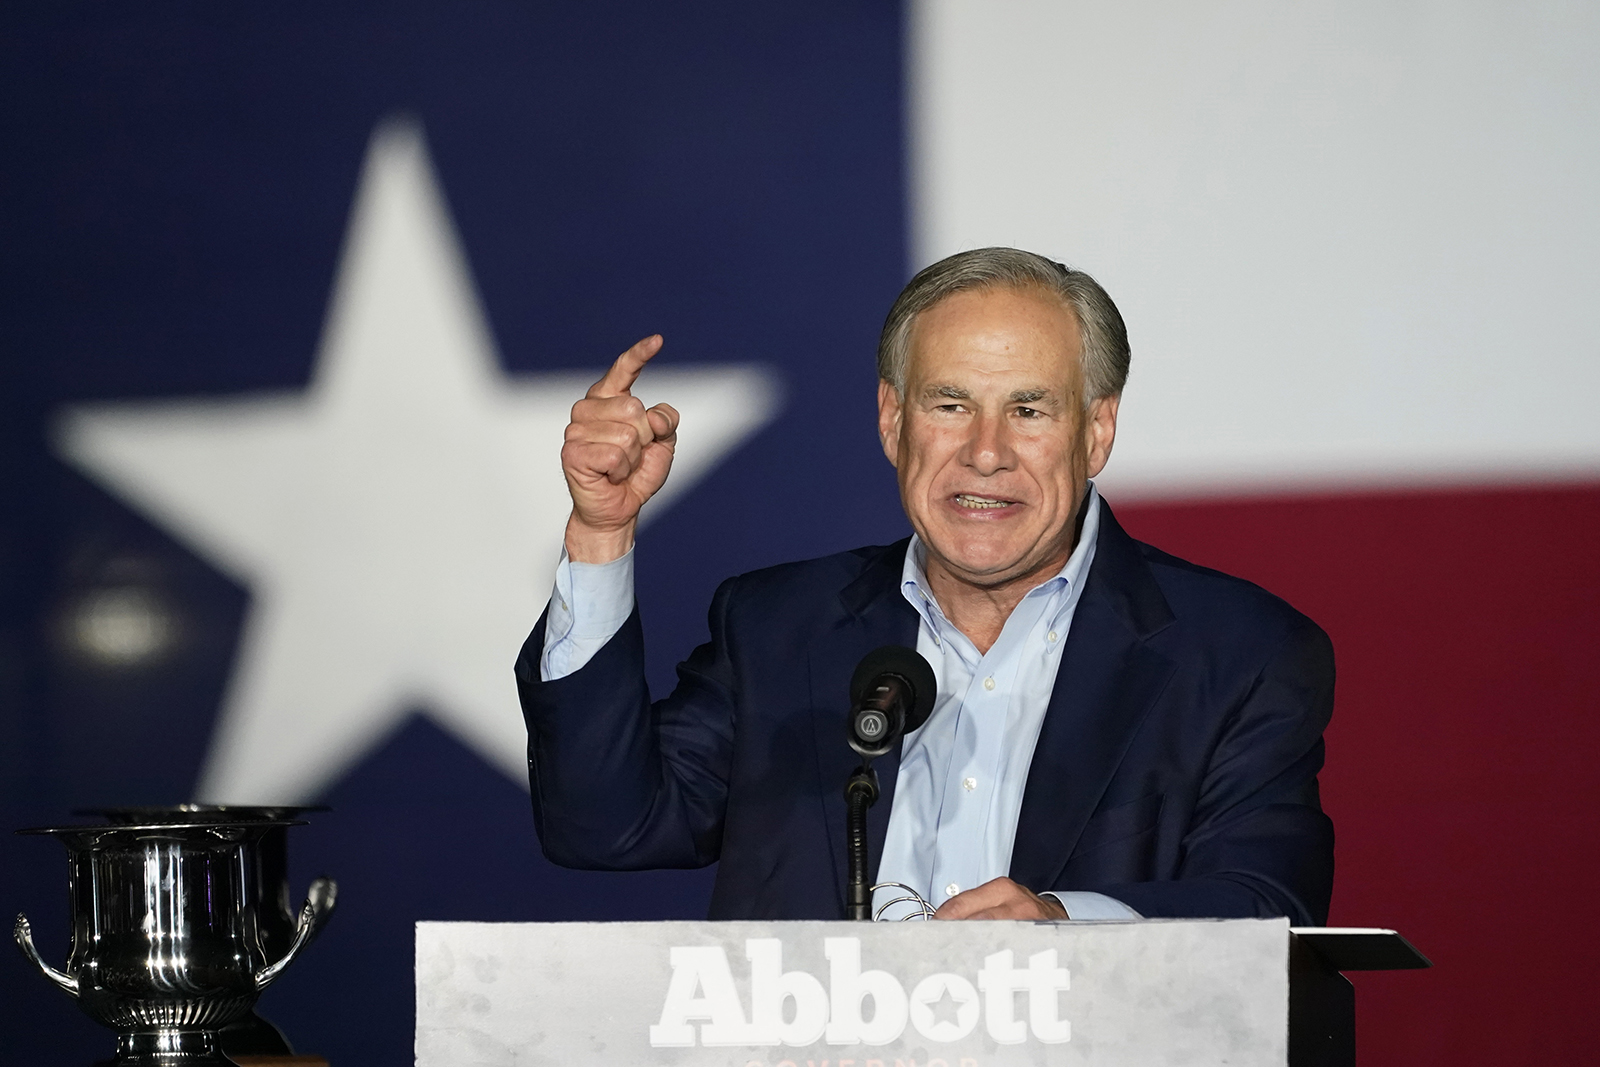 Texas Gov. Greg Abbott speaks during a primary night event March 1, 2022, in Corpus Christi, Texas. (AP Photo/Eric Gay)